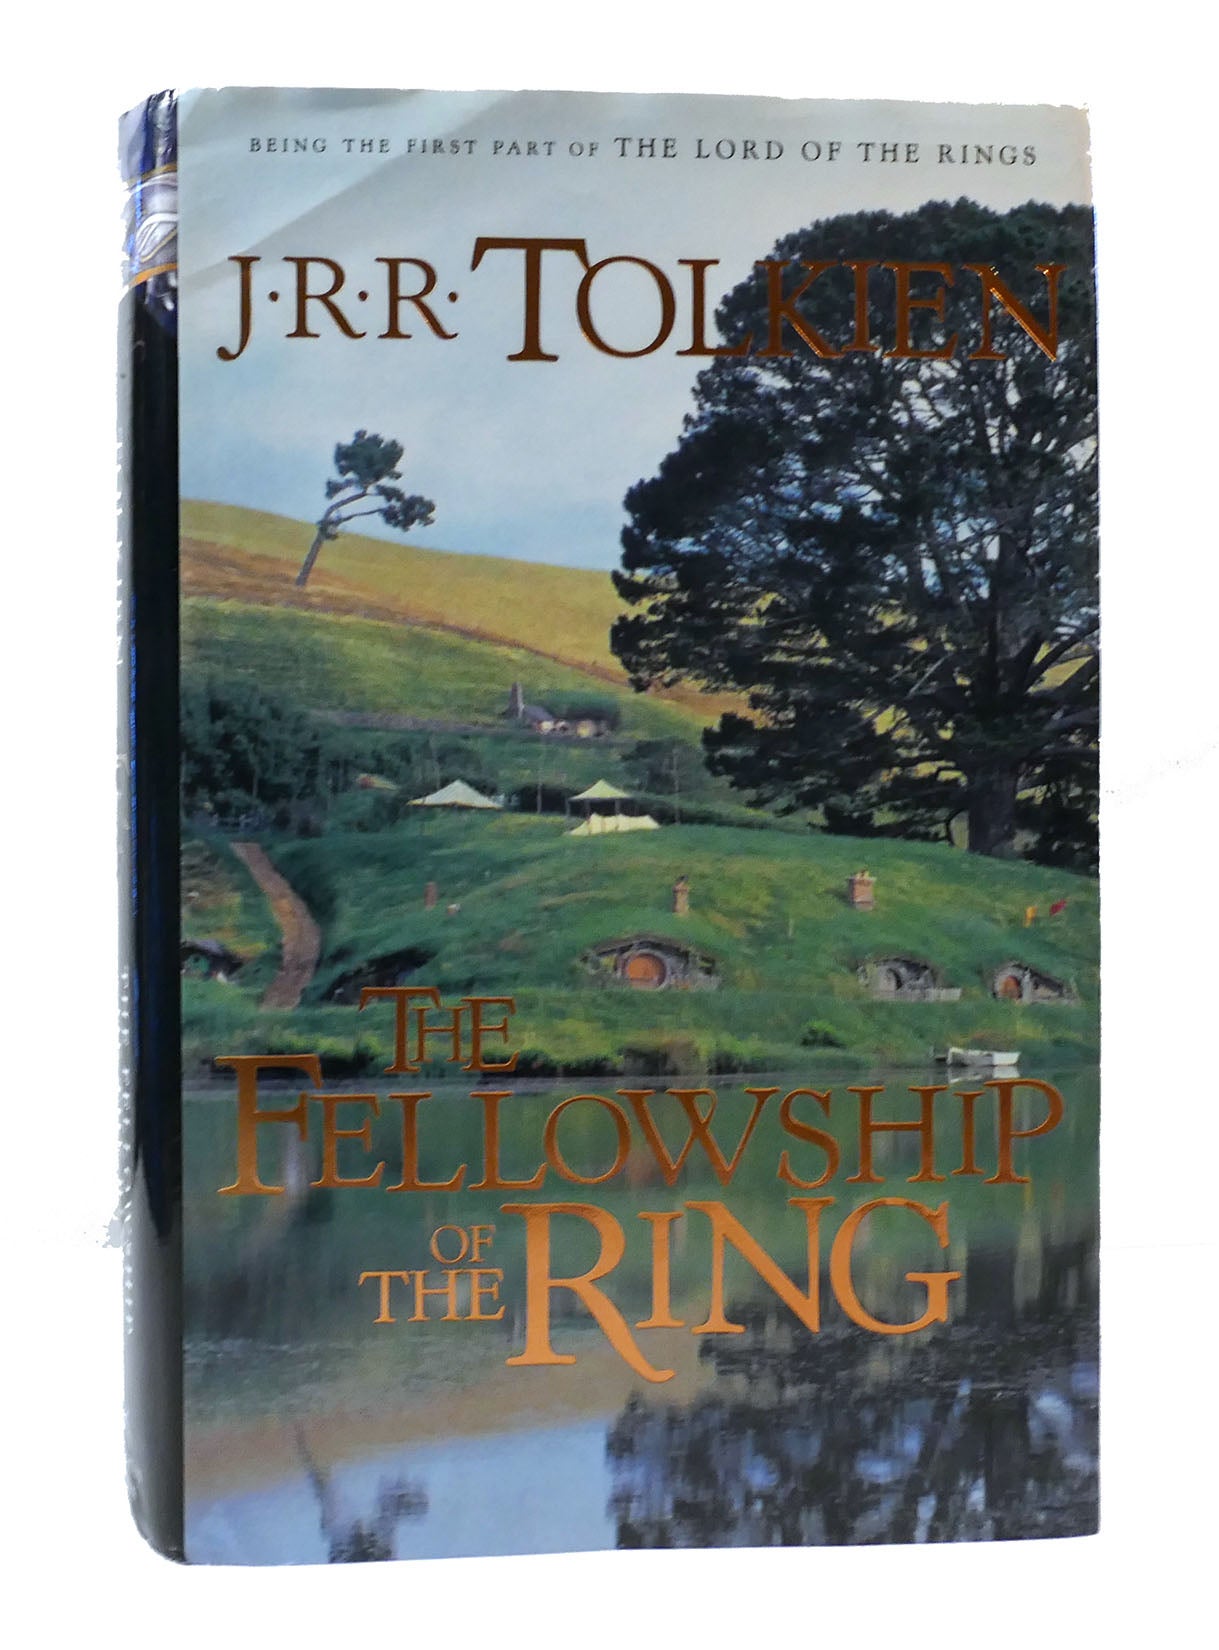 The Fellowship Of The Ring: Being the First Part of The Lord of the Rings  (The Lord of the Rings, 1): Tolkien, J.R.R.: 9780395489314: Amazon.com:  Books